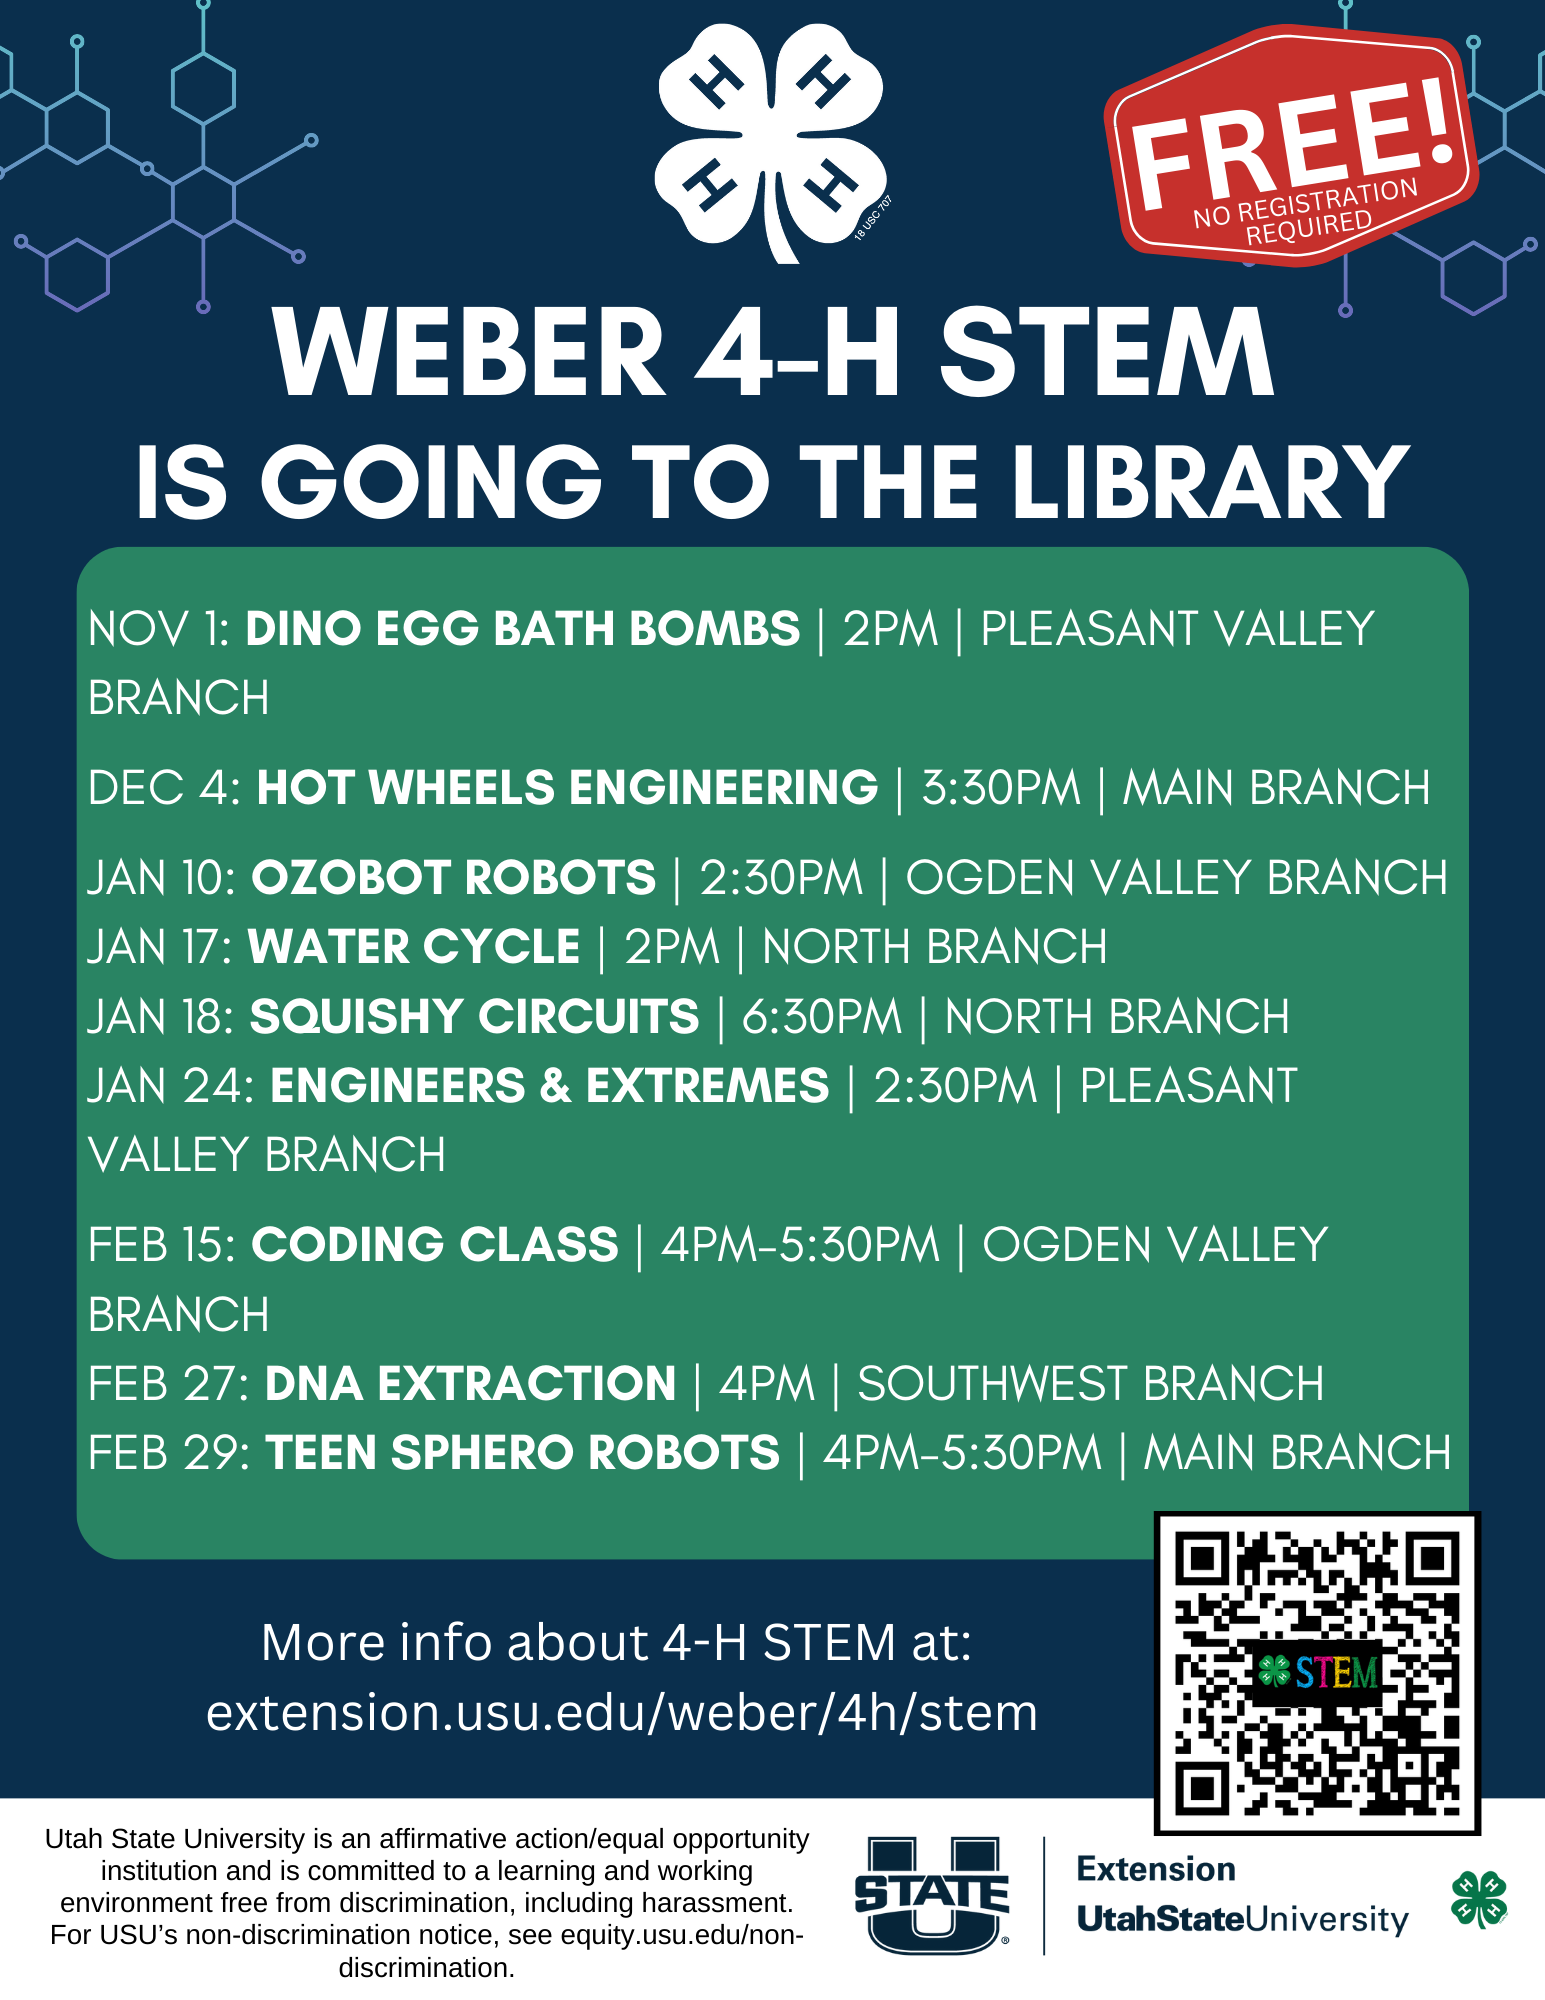 STEM at the Library